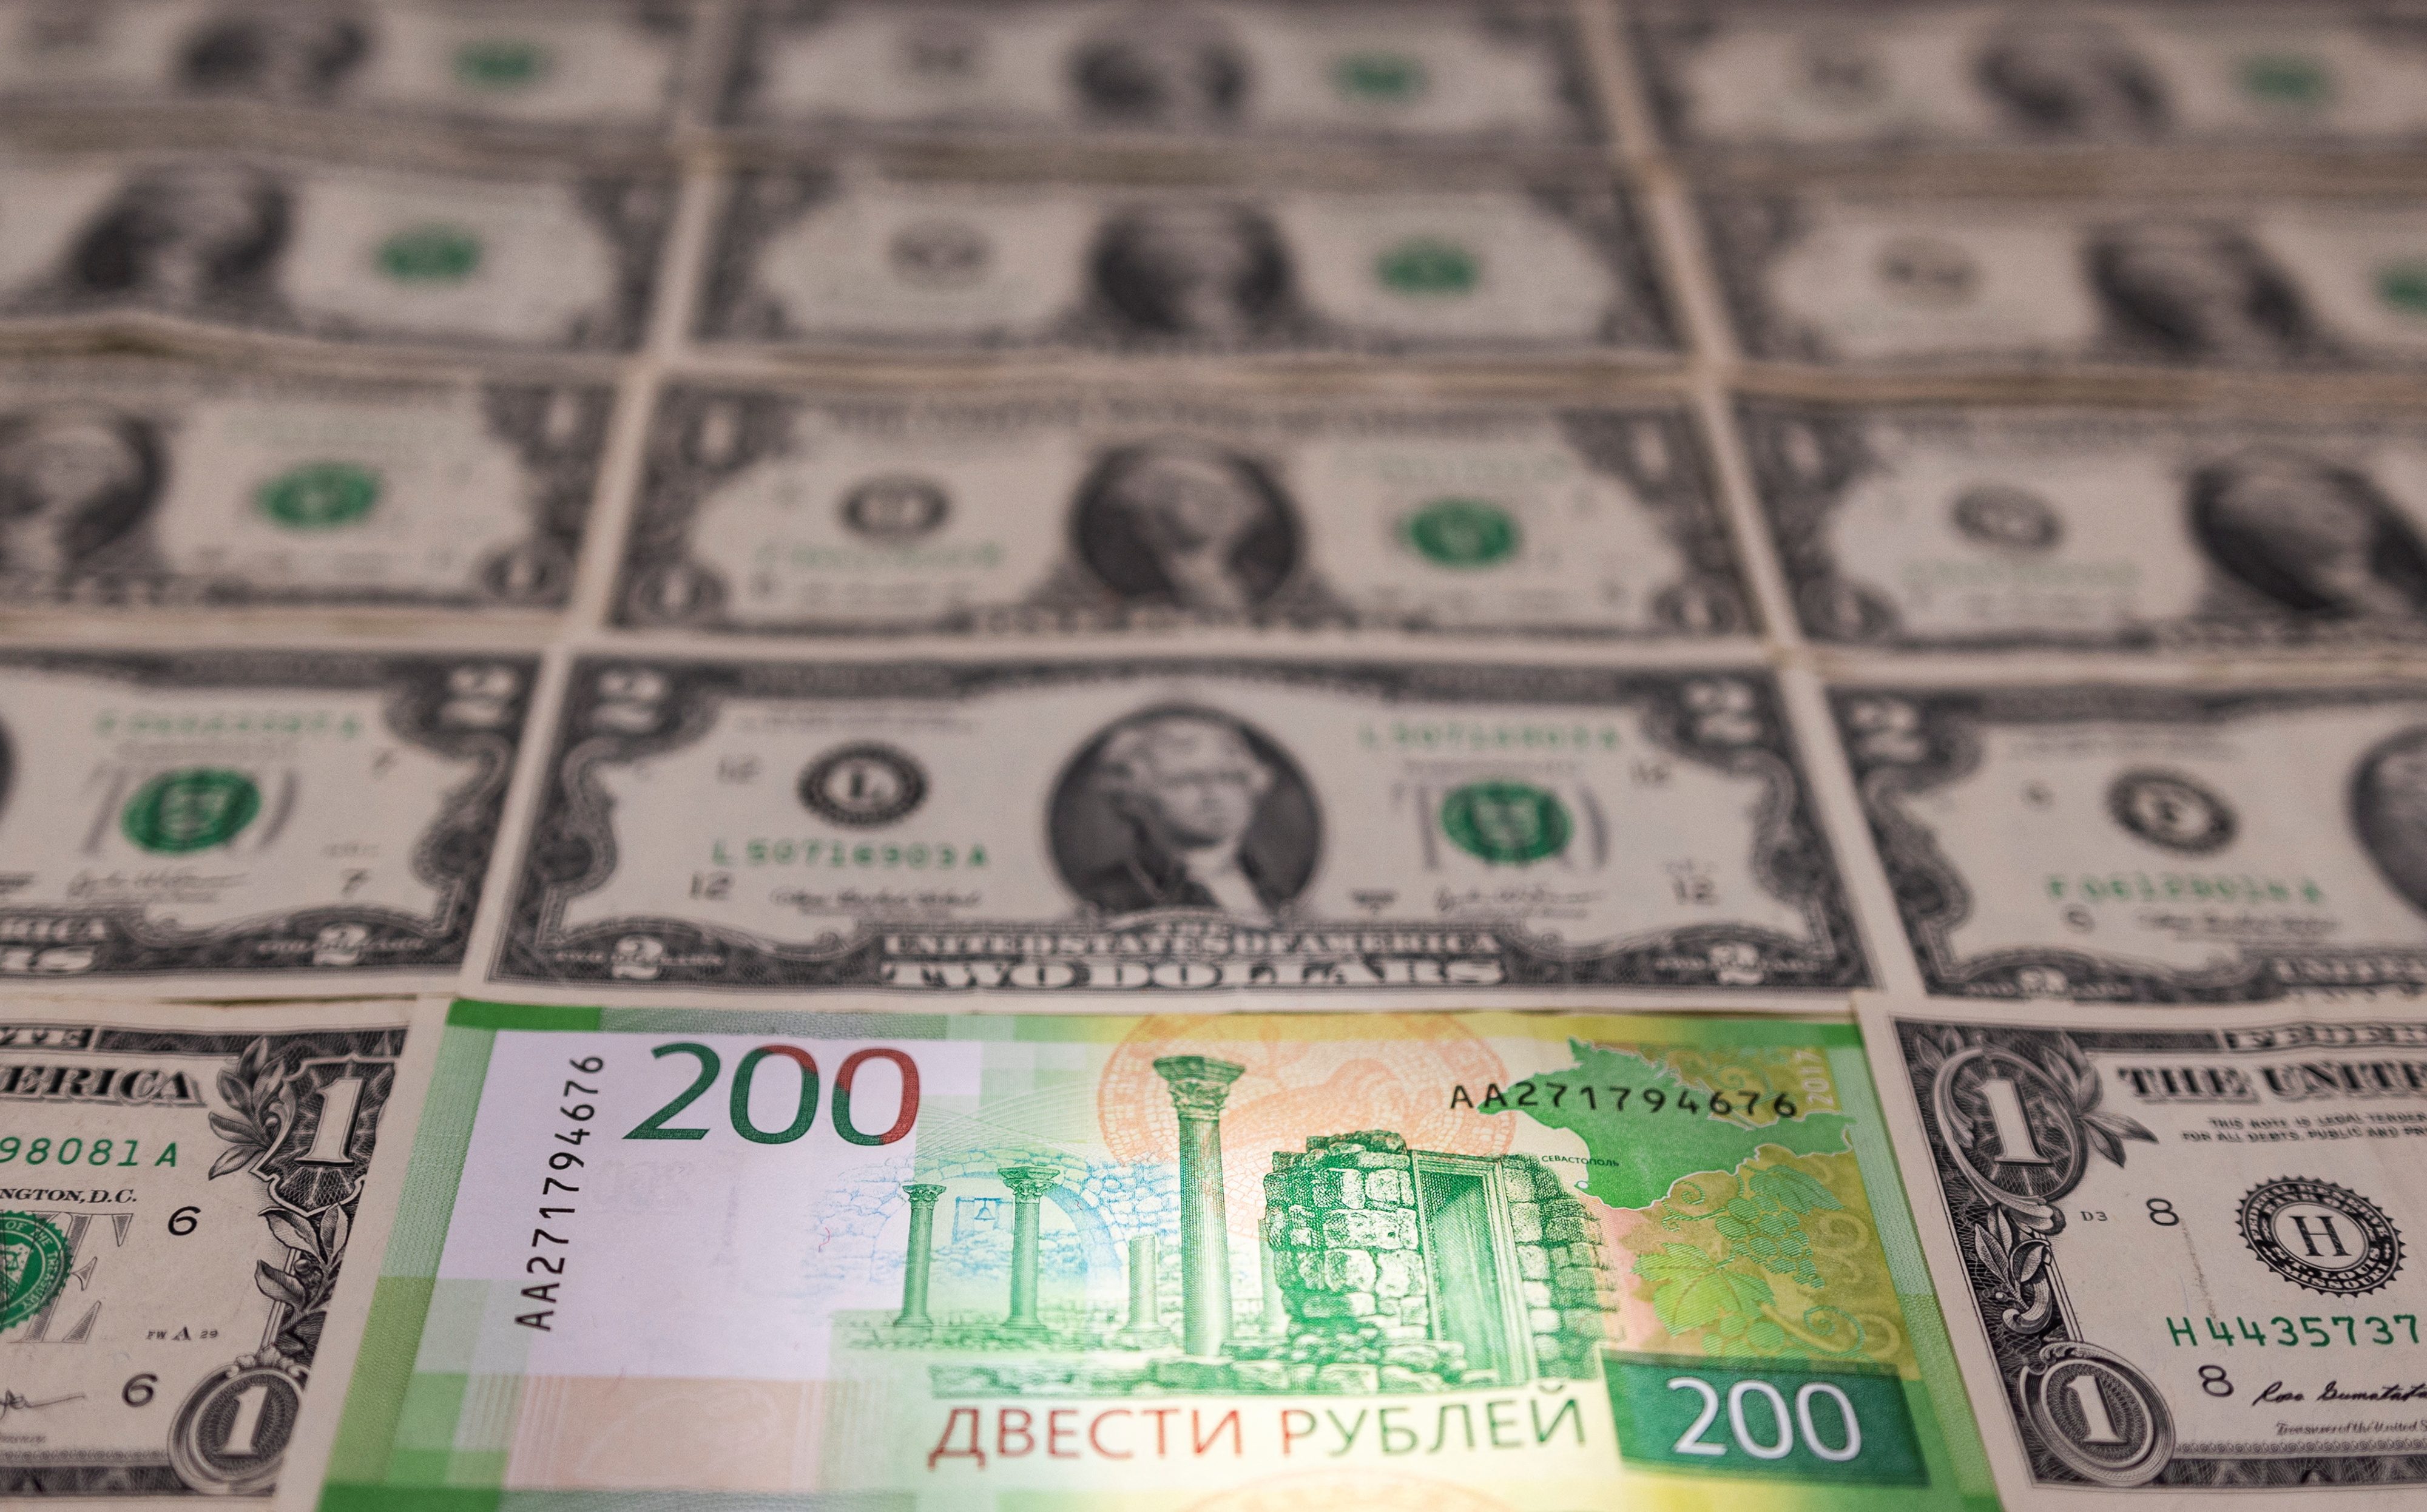 Illustration shows Russian Rouble banknote is placed on U.S. Dollar banknotes